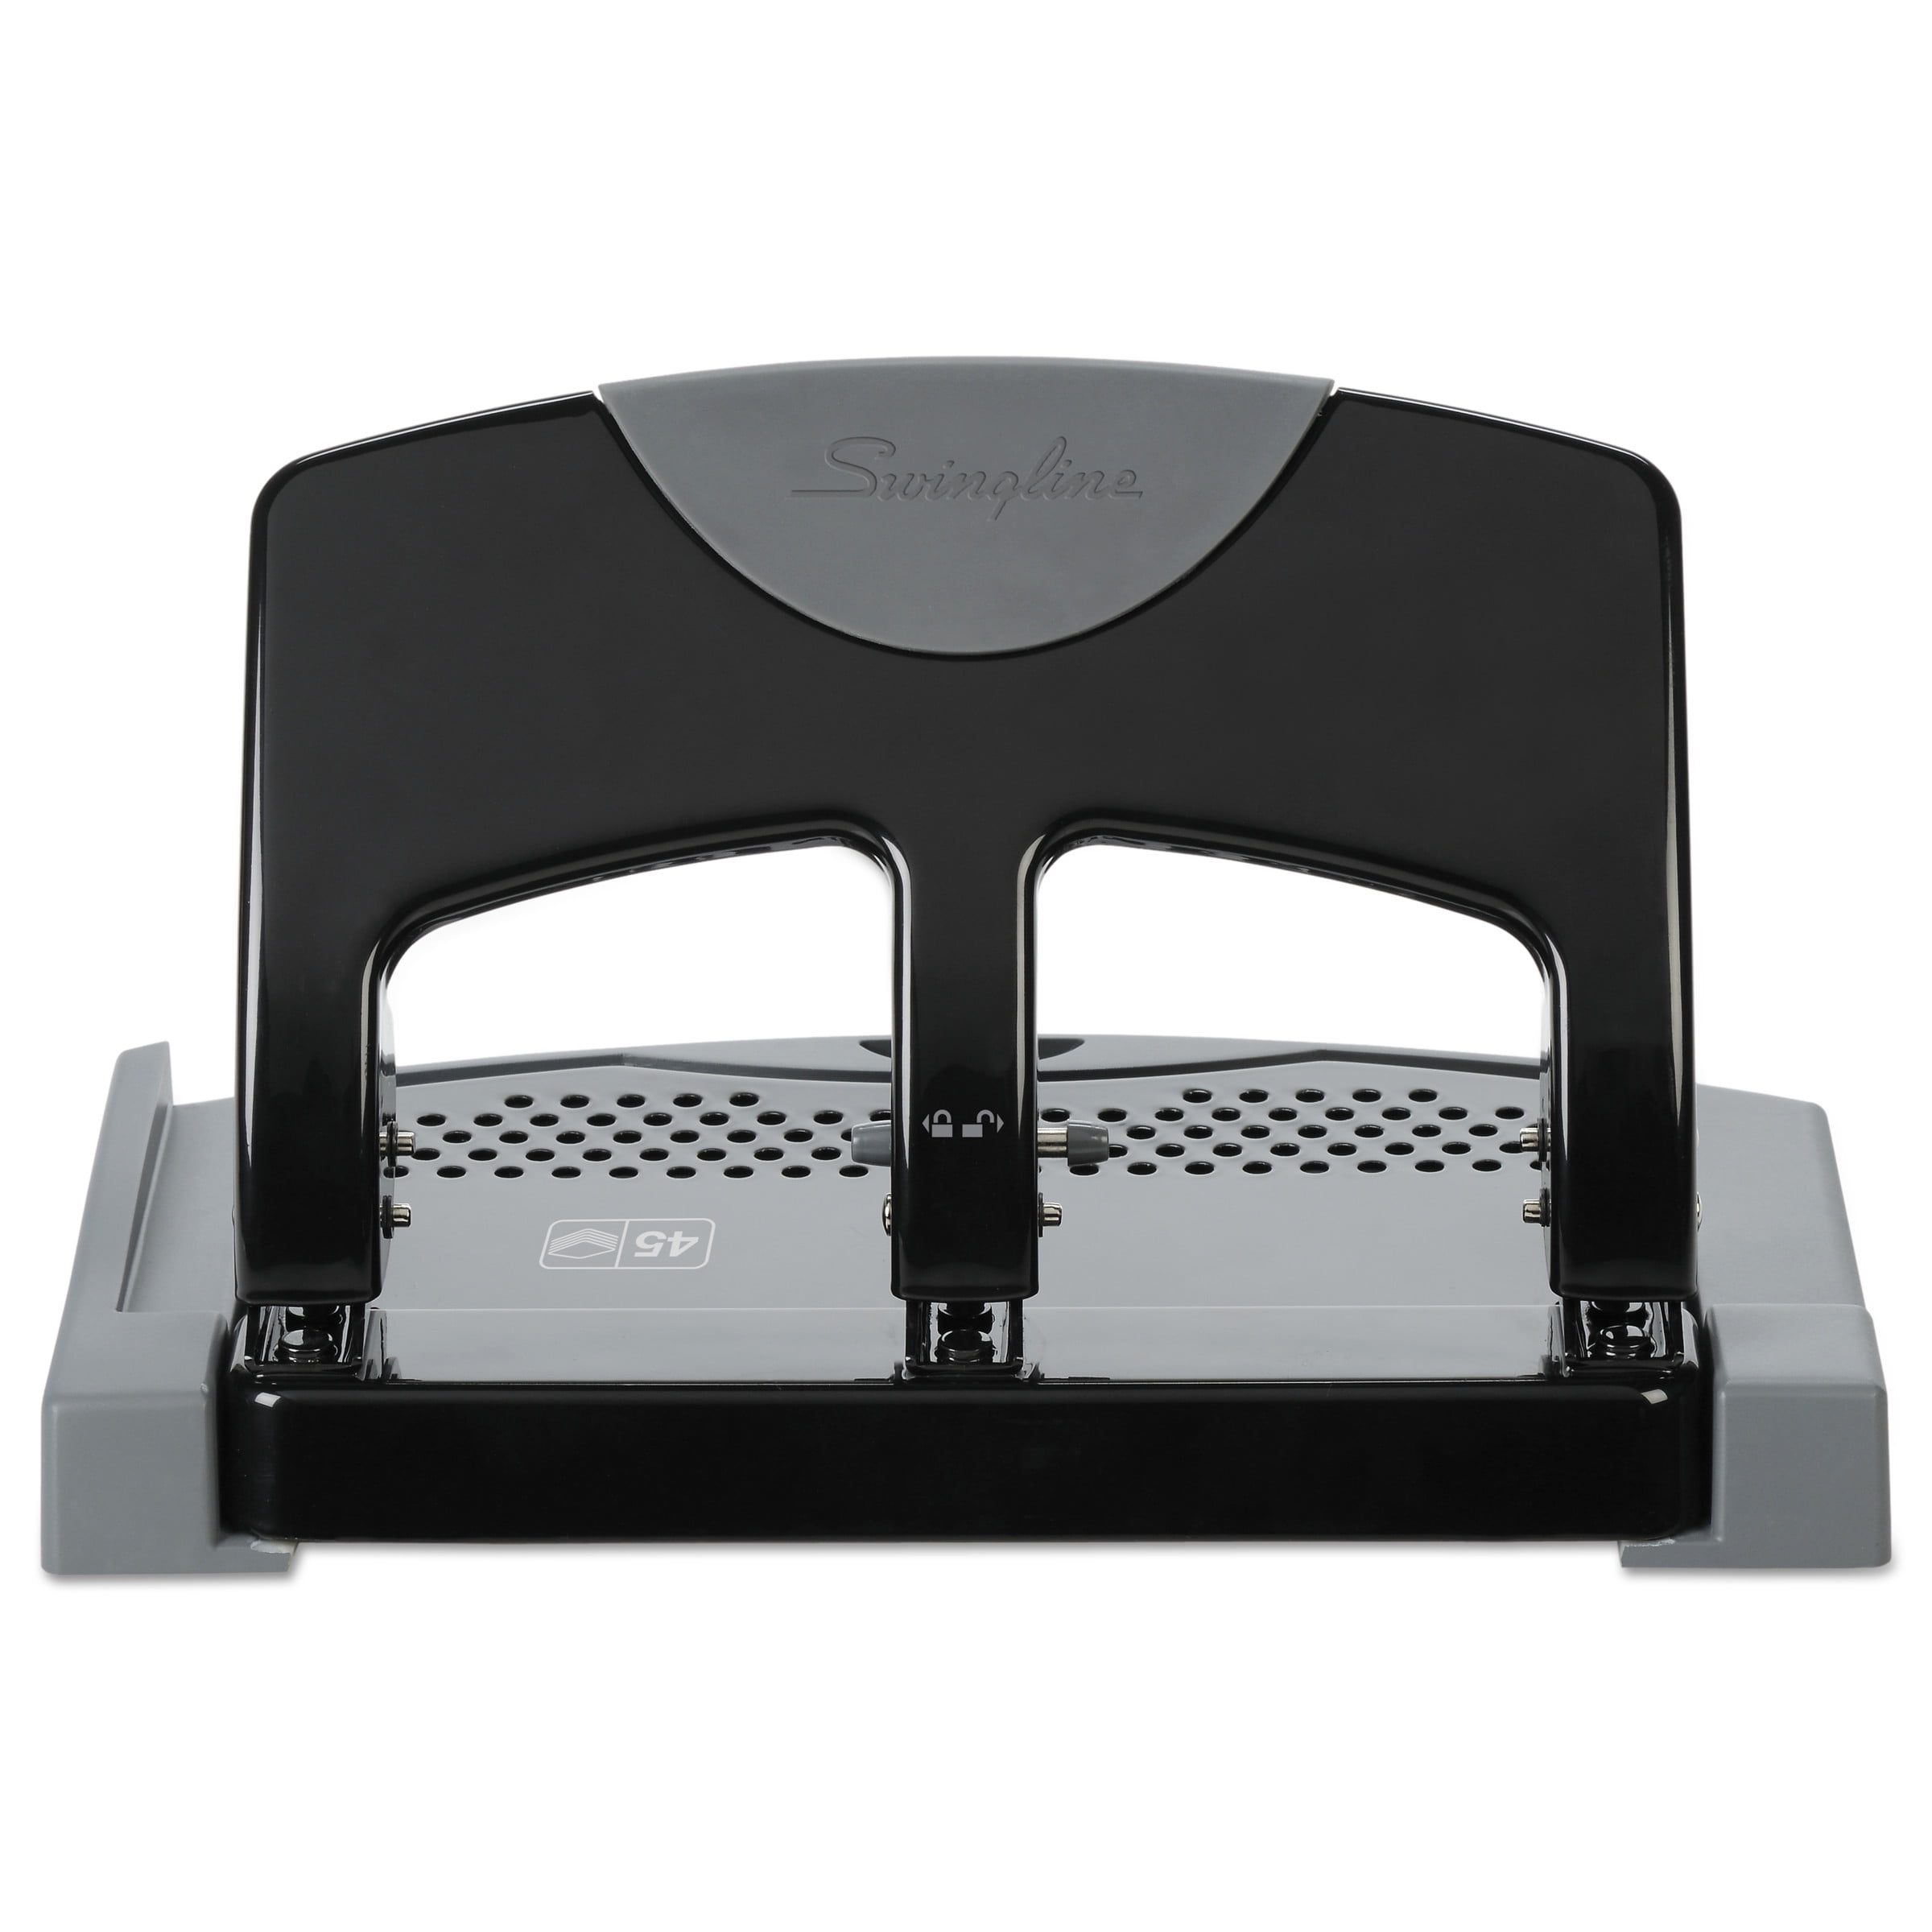 Swingline SmartTouch 3-Hole Punch Hole Punches 